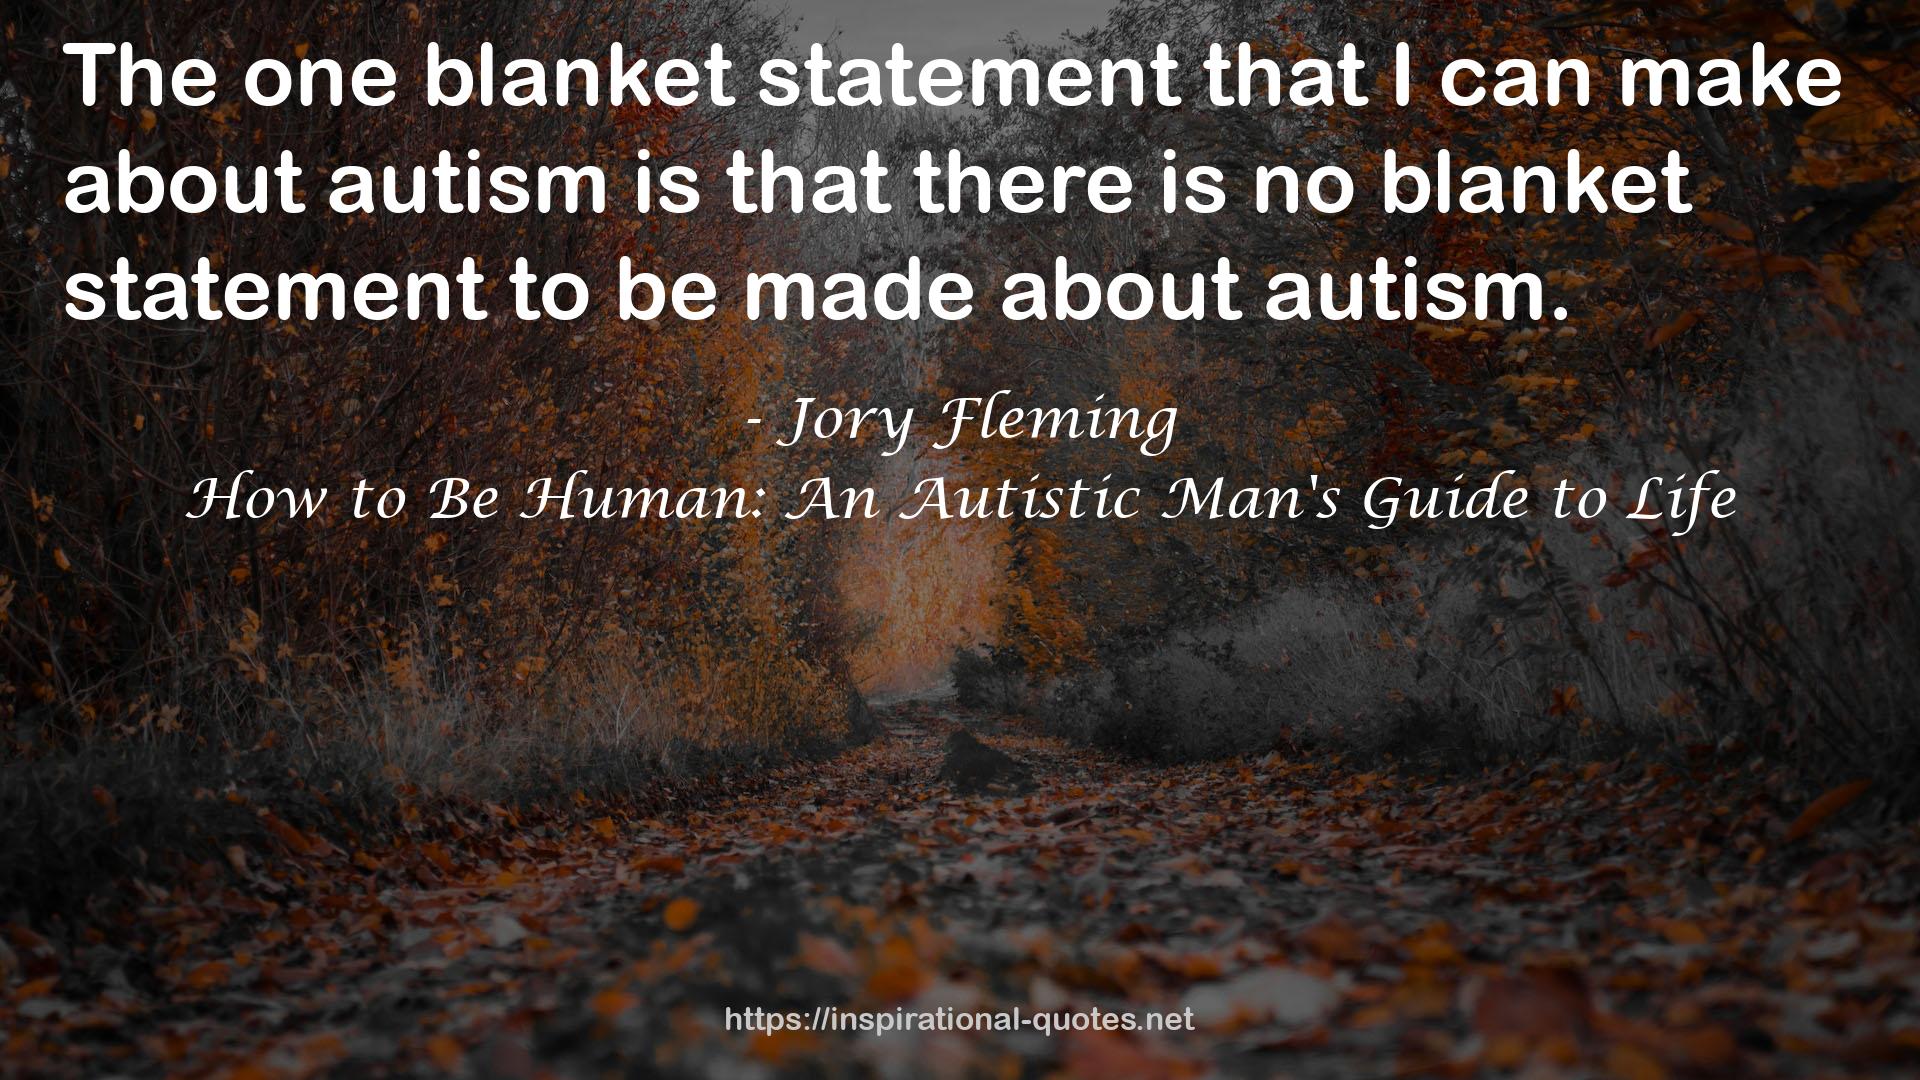 How to Be Human: An Autistic Man's Guide to Life QUOTES